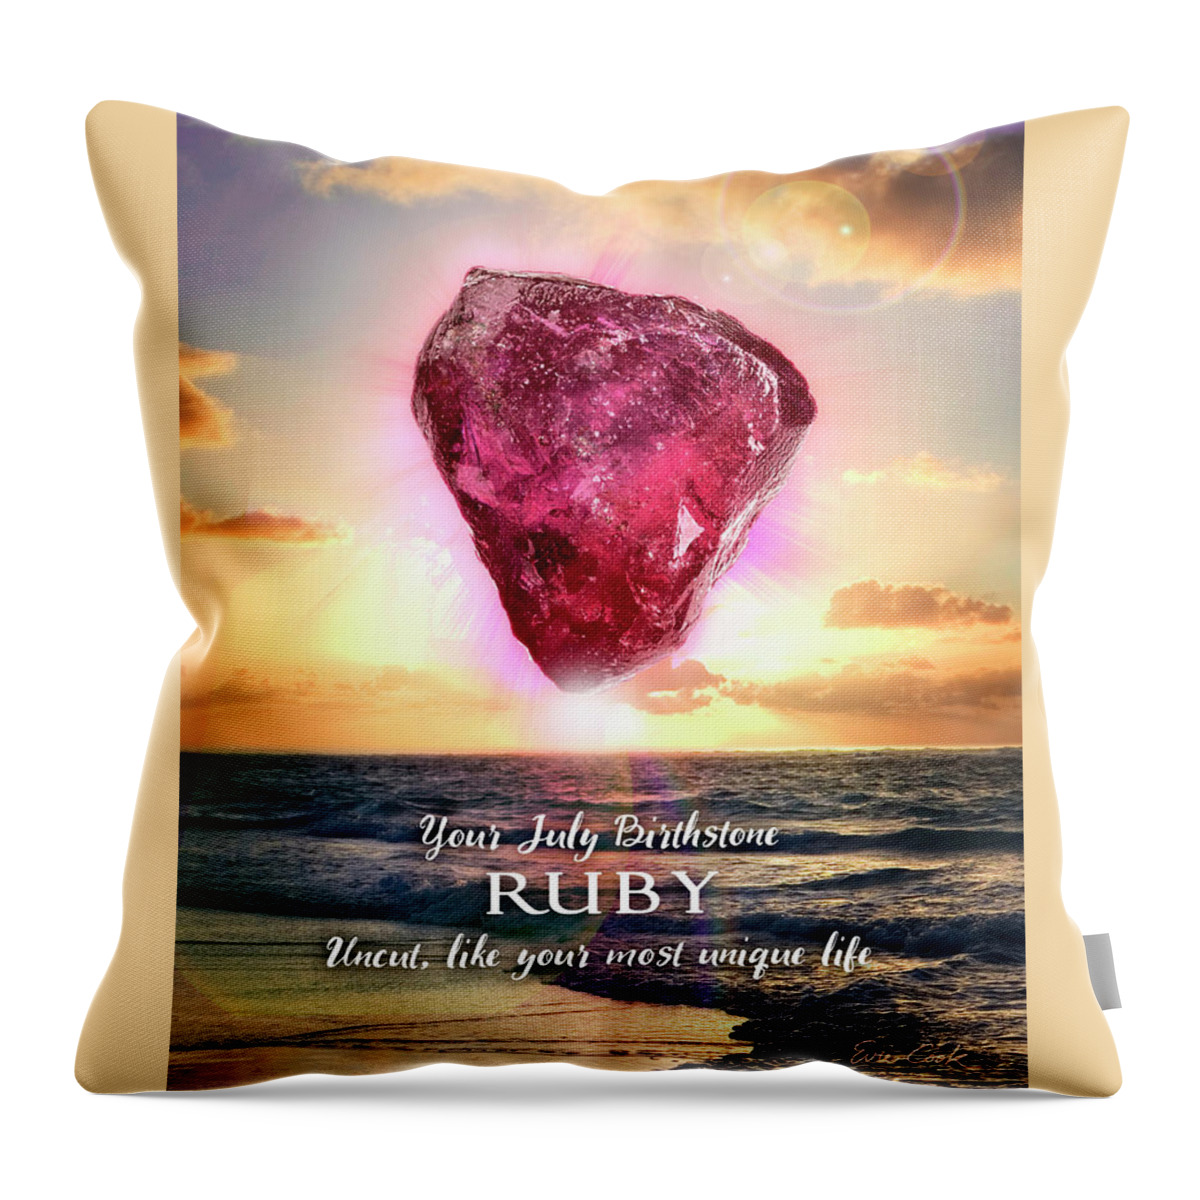 July Throw Pillow featuring the digital art July Birthstone Ruby by Evie Cook